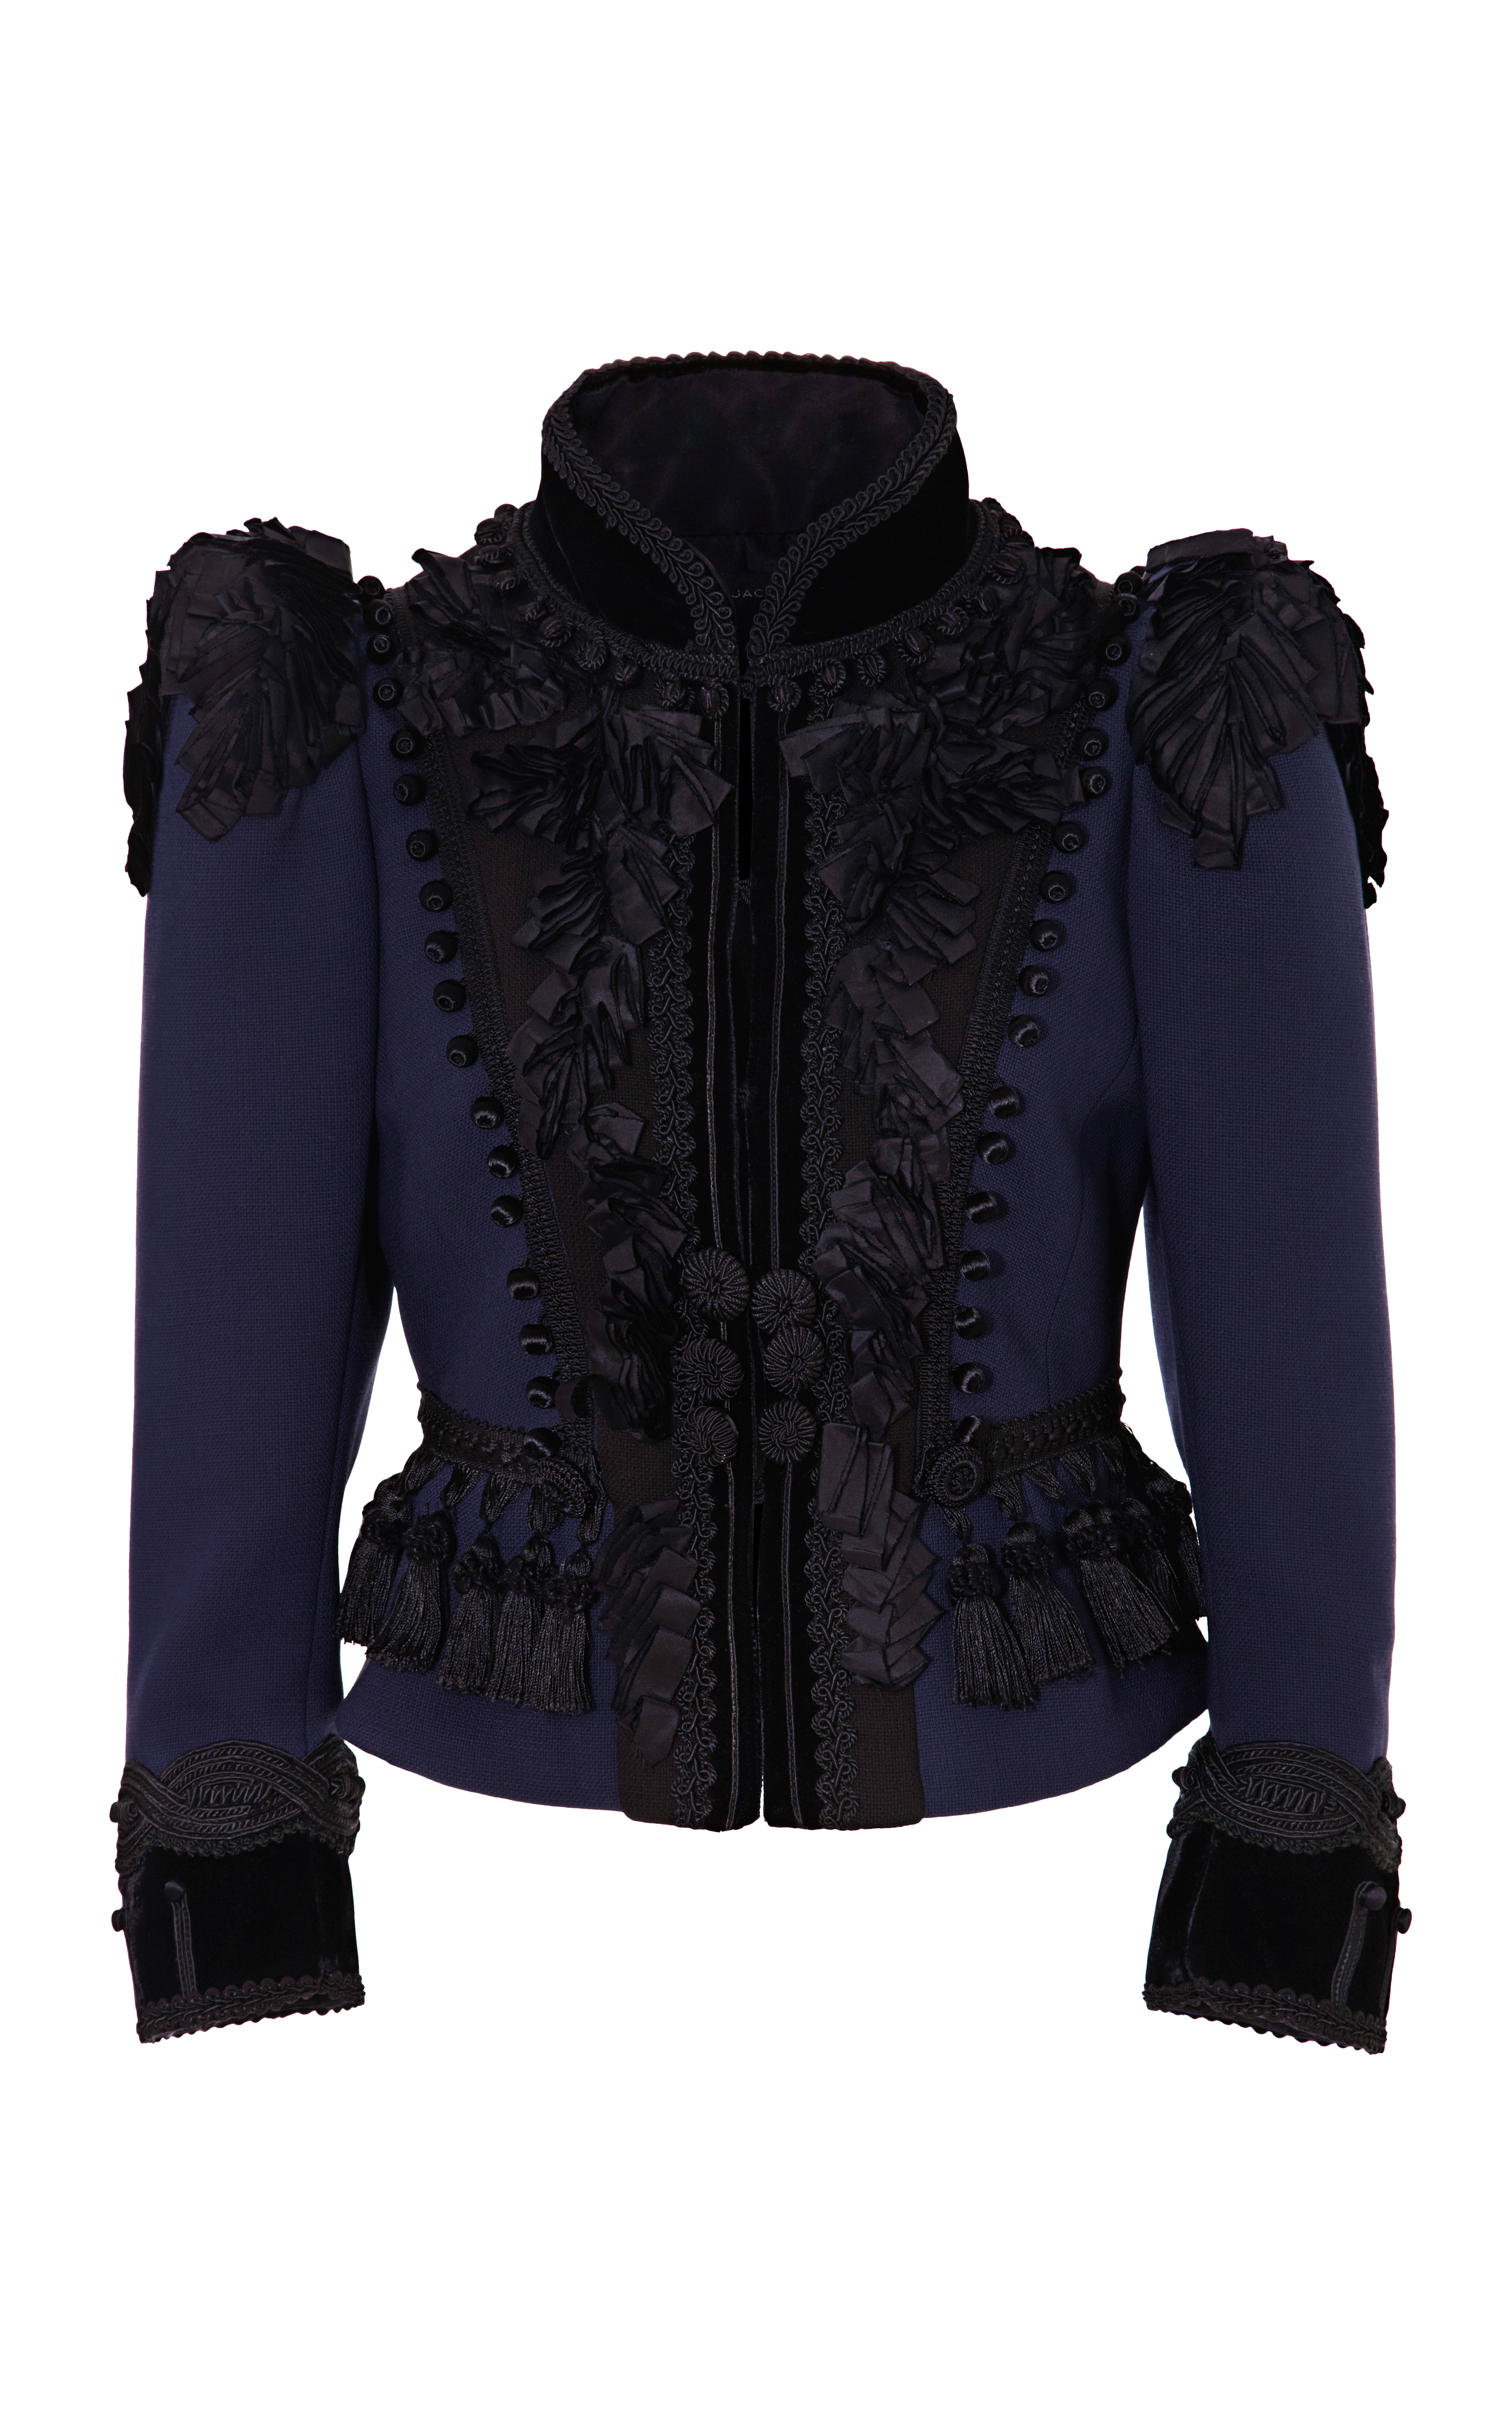 Marc Jacobs Double-face Light-weight Wool Fitted Victorian Jacket in Navy (Blue) - Lyst